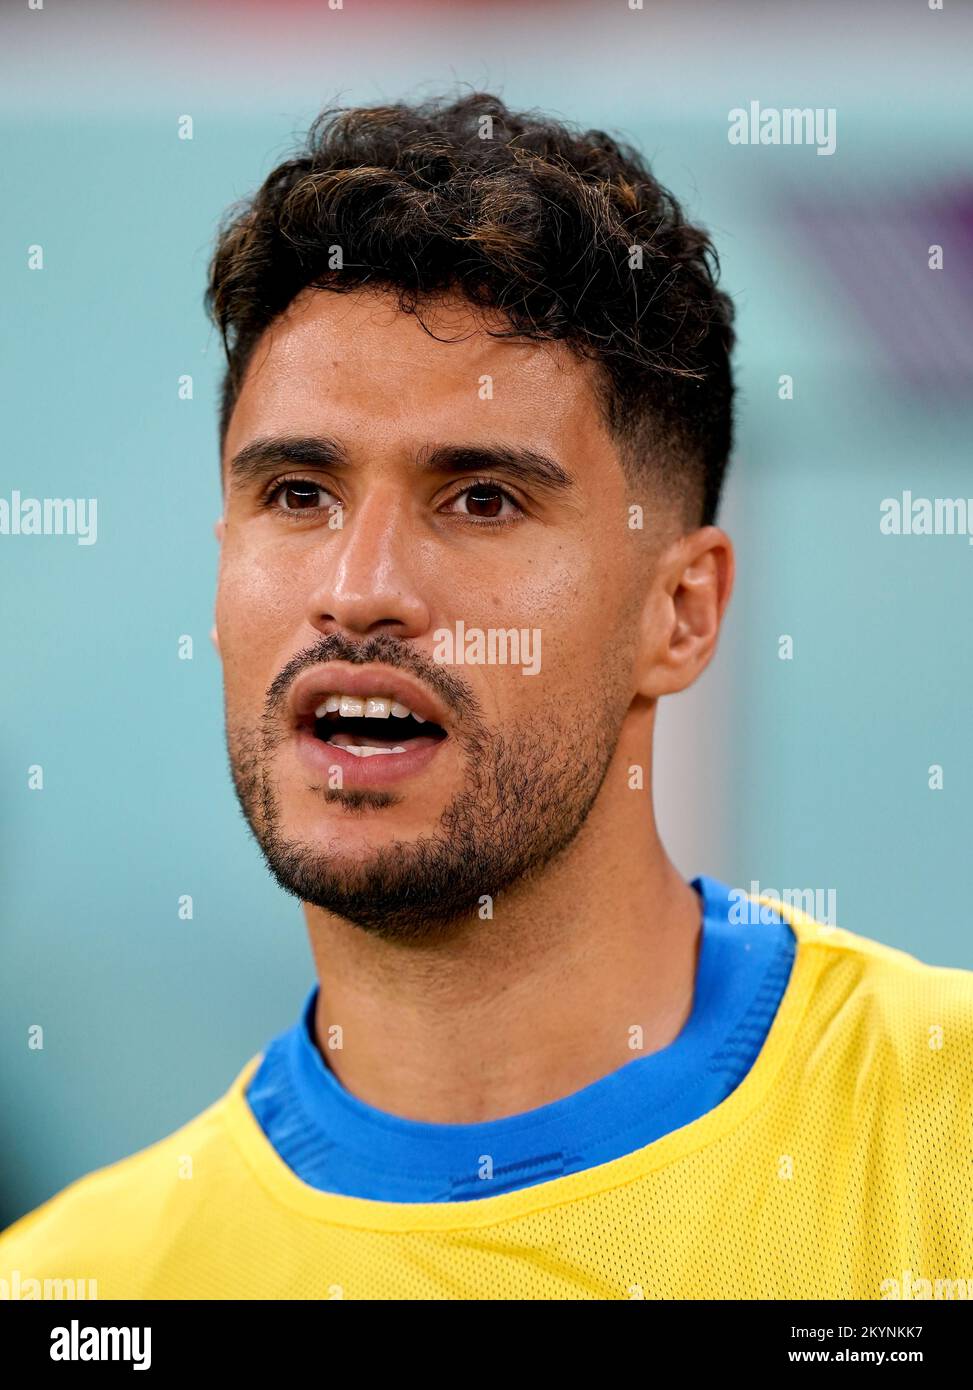 Morocco goalkeeper Munir Mohand Mohamedi ahead of the FIFA World Cup Group F match at the Al Thumama Stadium, Doha, Qatar. Picture date: Thursday December 1, 2022. Stock Photo